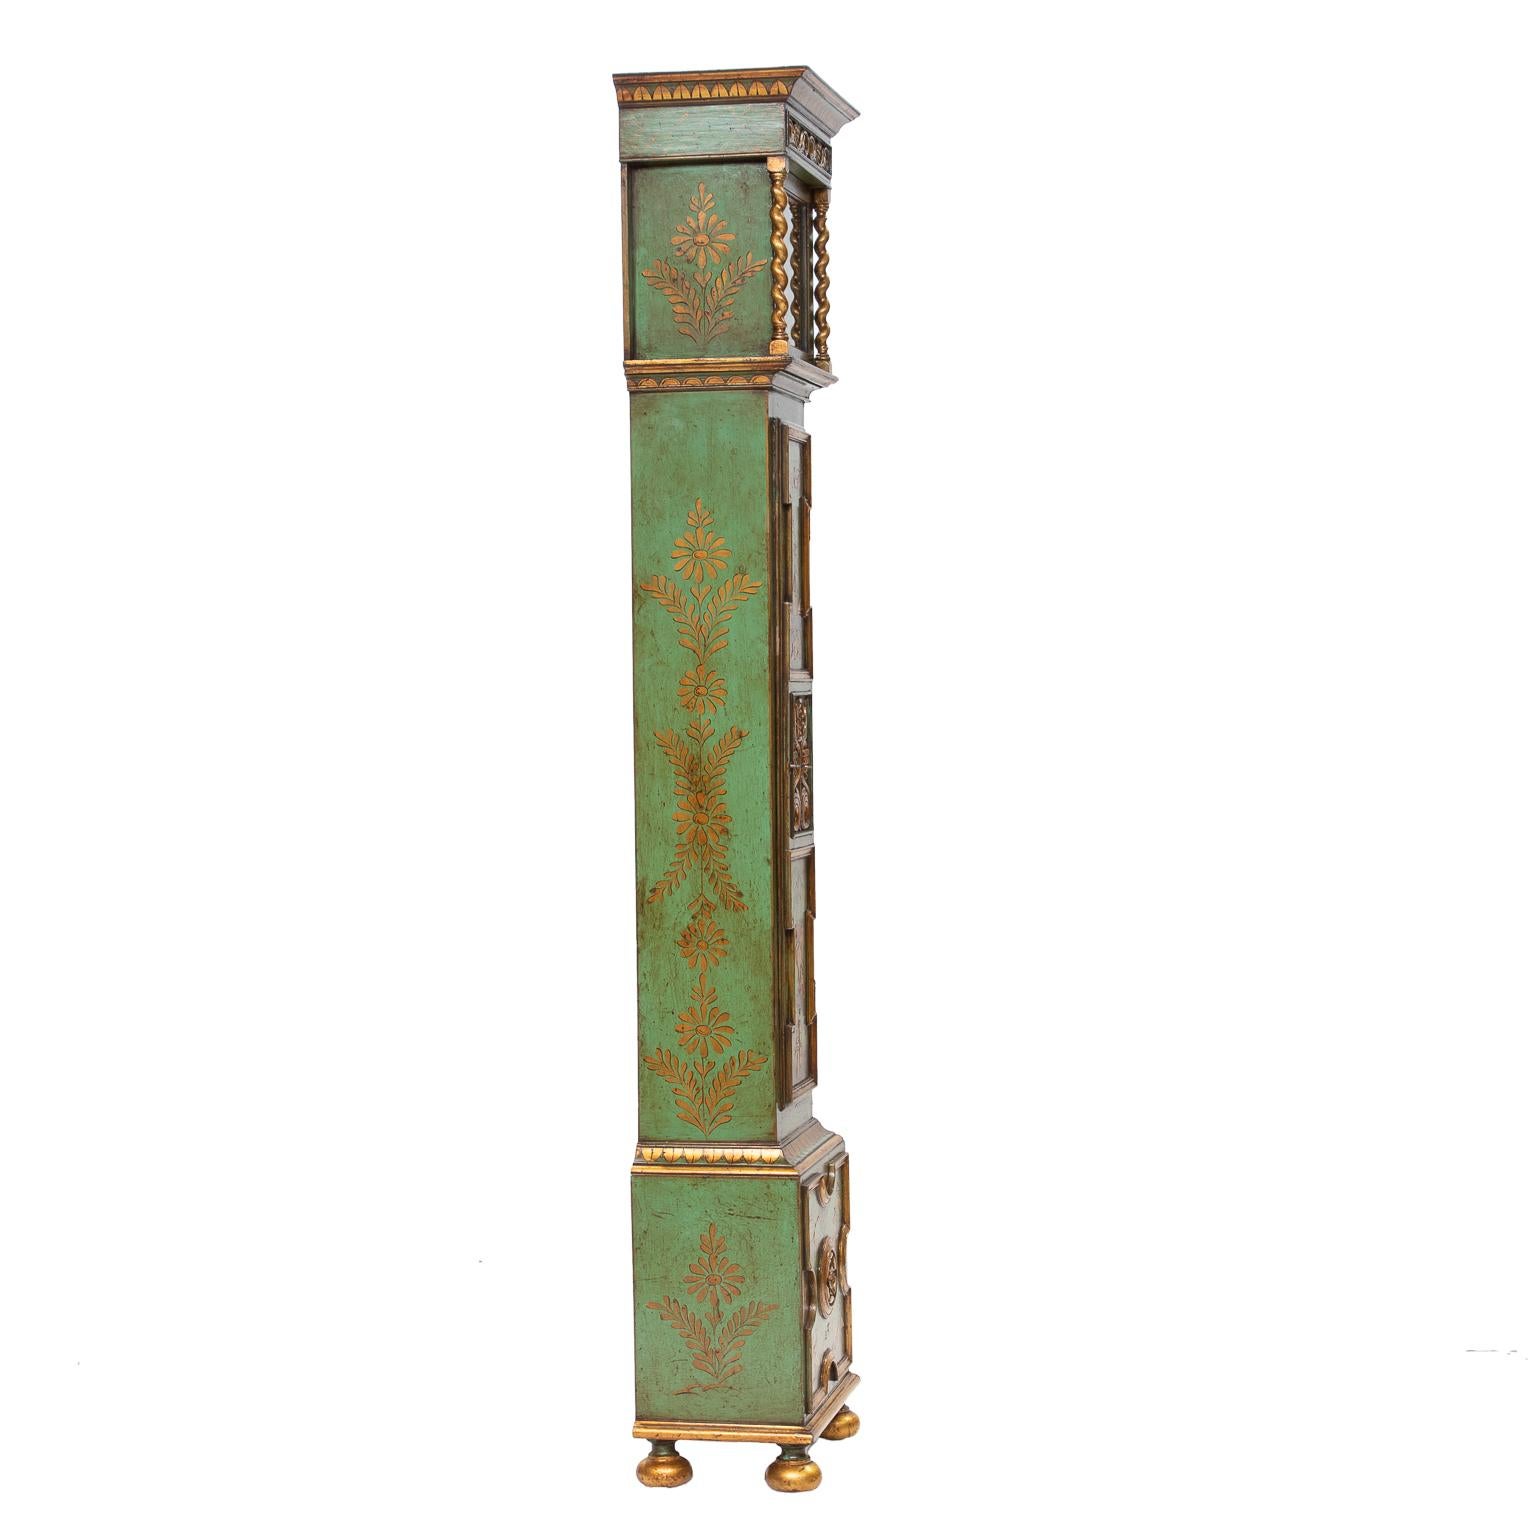 Chinoiserie lacquered grandmother clock. Wonderful detail and color applied. Painted over gesso and raised figures. Brass Dial face with chimes on the quarter hour and two chime options on the hour, Whittington and Westminster. The case is in very